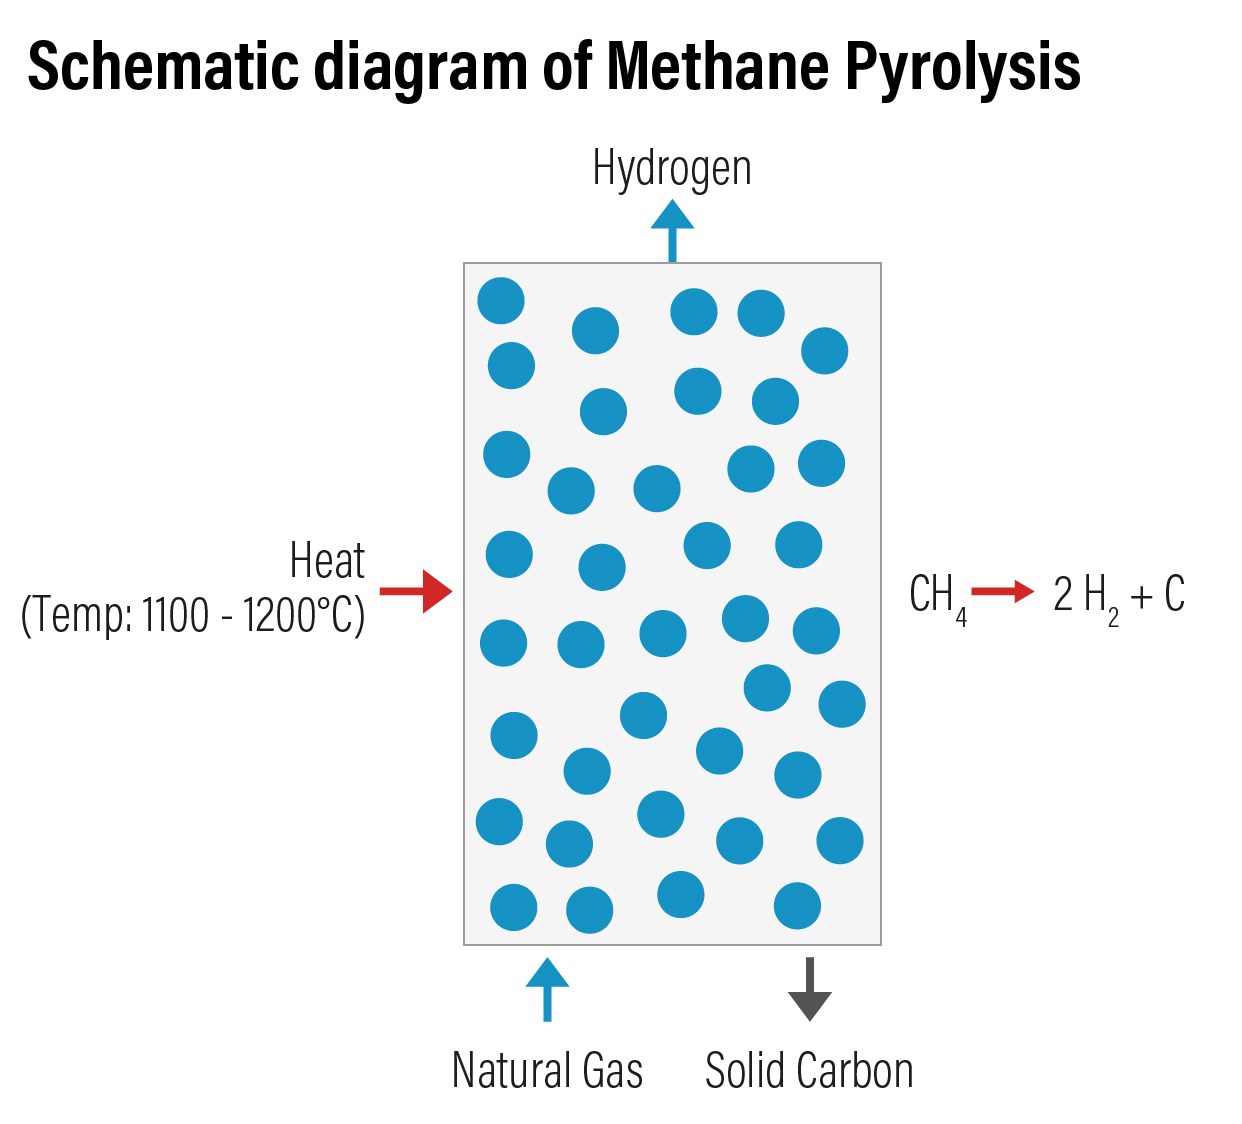 The schematic diagram of Methane Pyrolysis